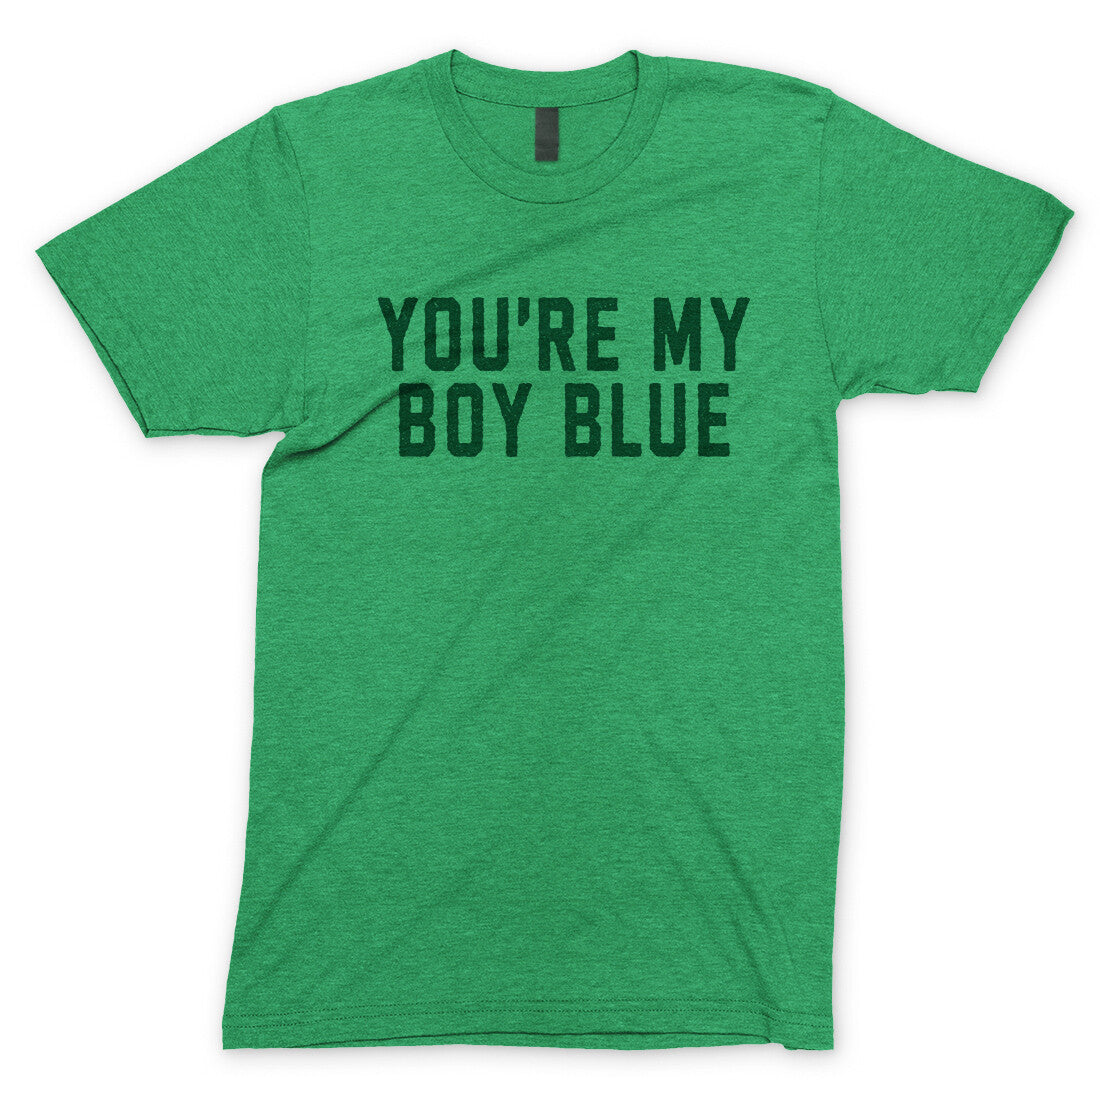 You're my Boy Blue in Heather Irish Green Color